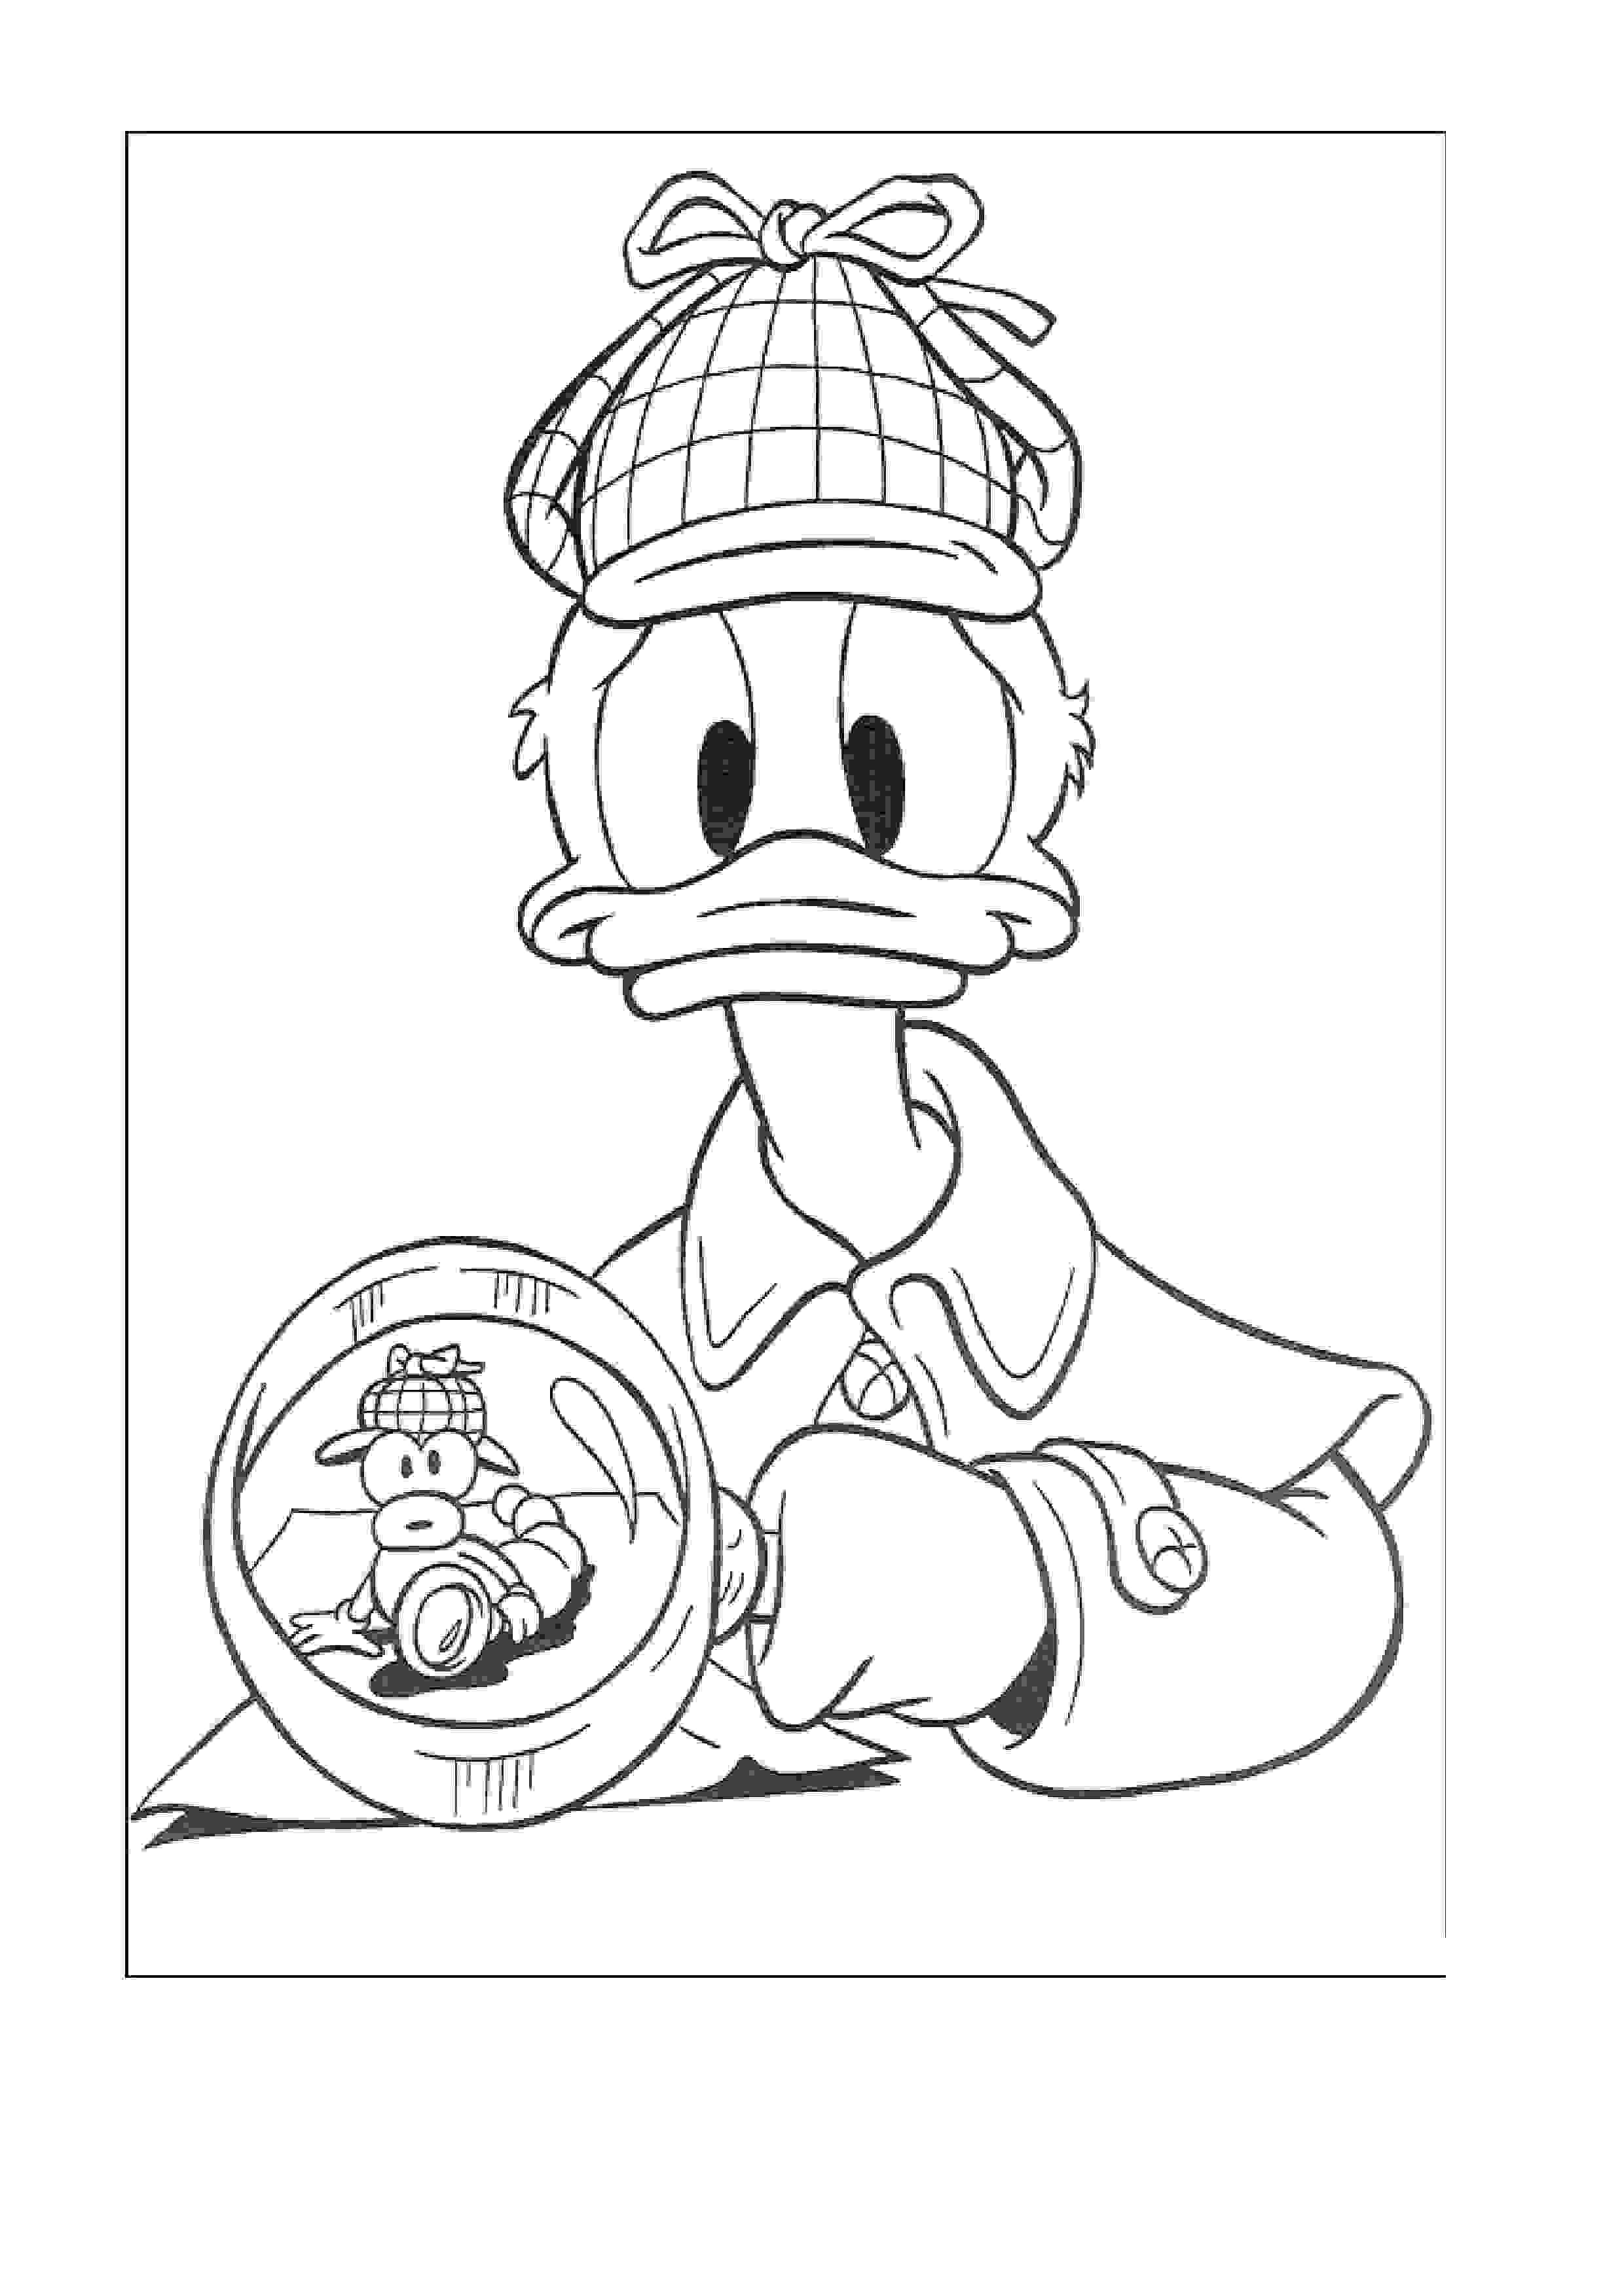 Drawing Donald Duck #30171 (Cartoons) – Printable coloring pages